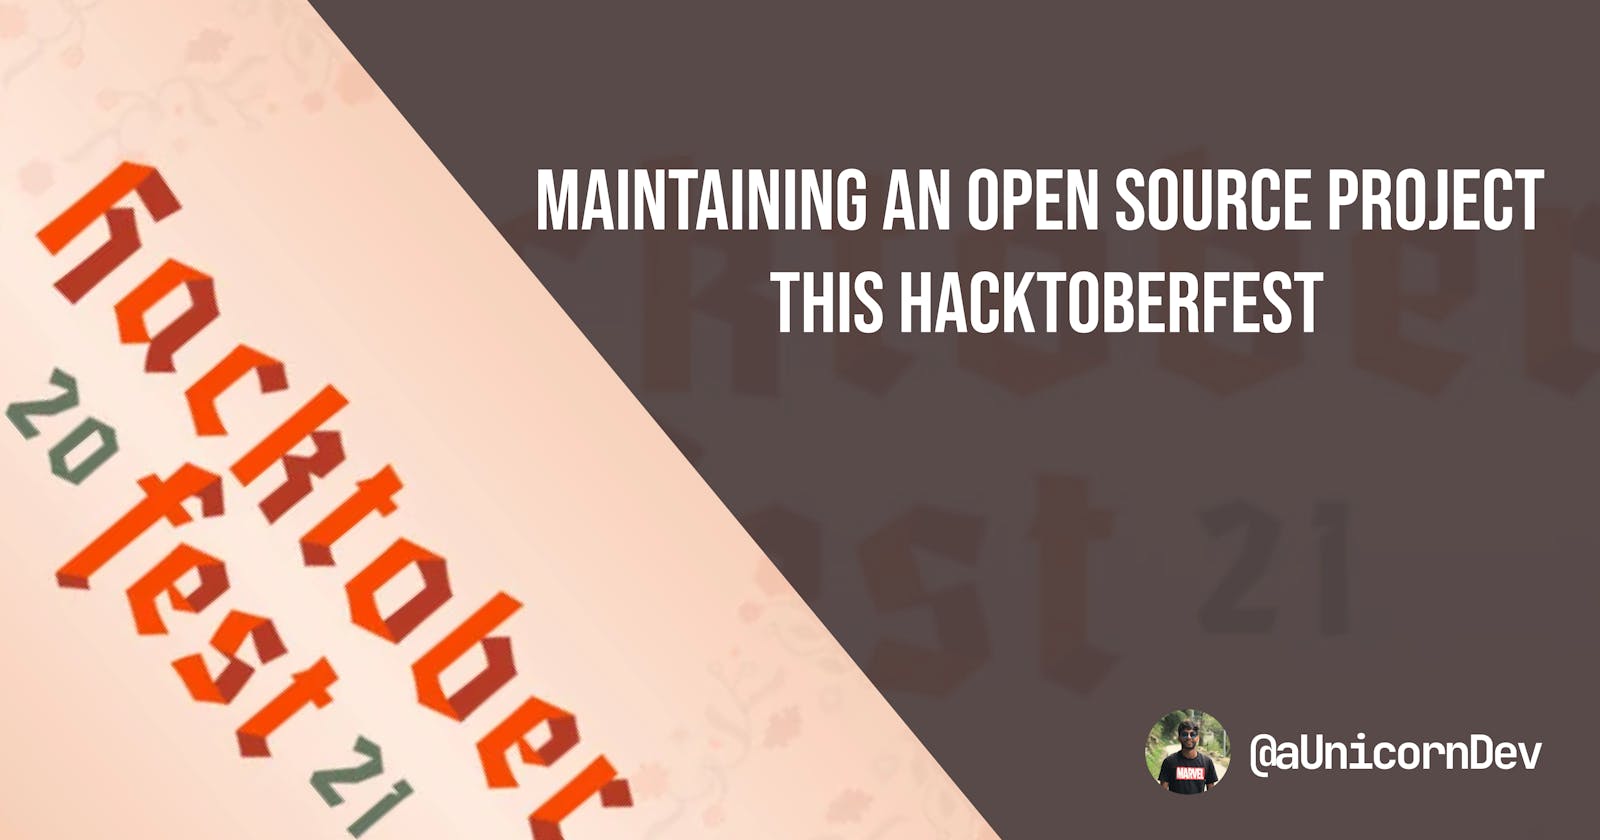 Maintaining an Open Source Project this Hacktoberfest